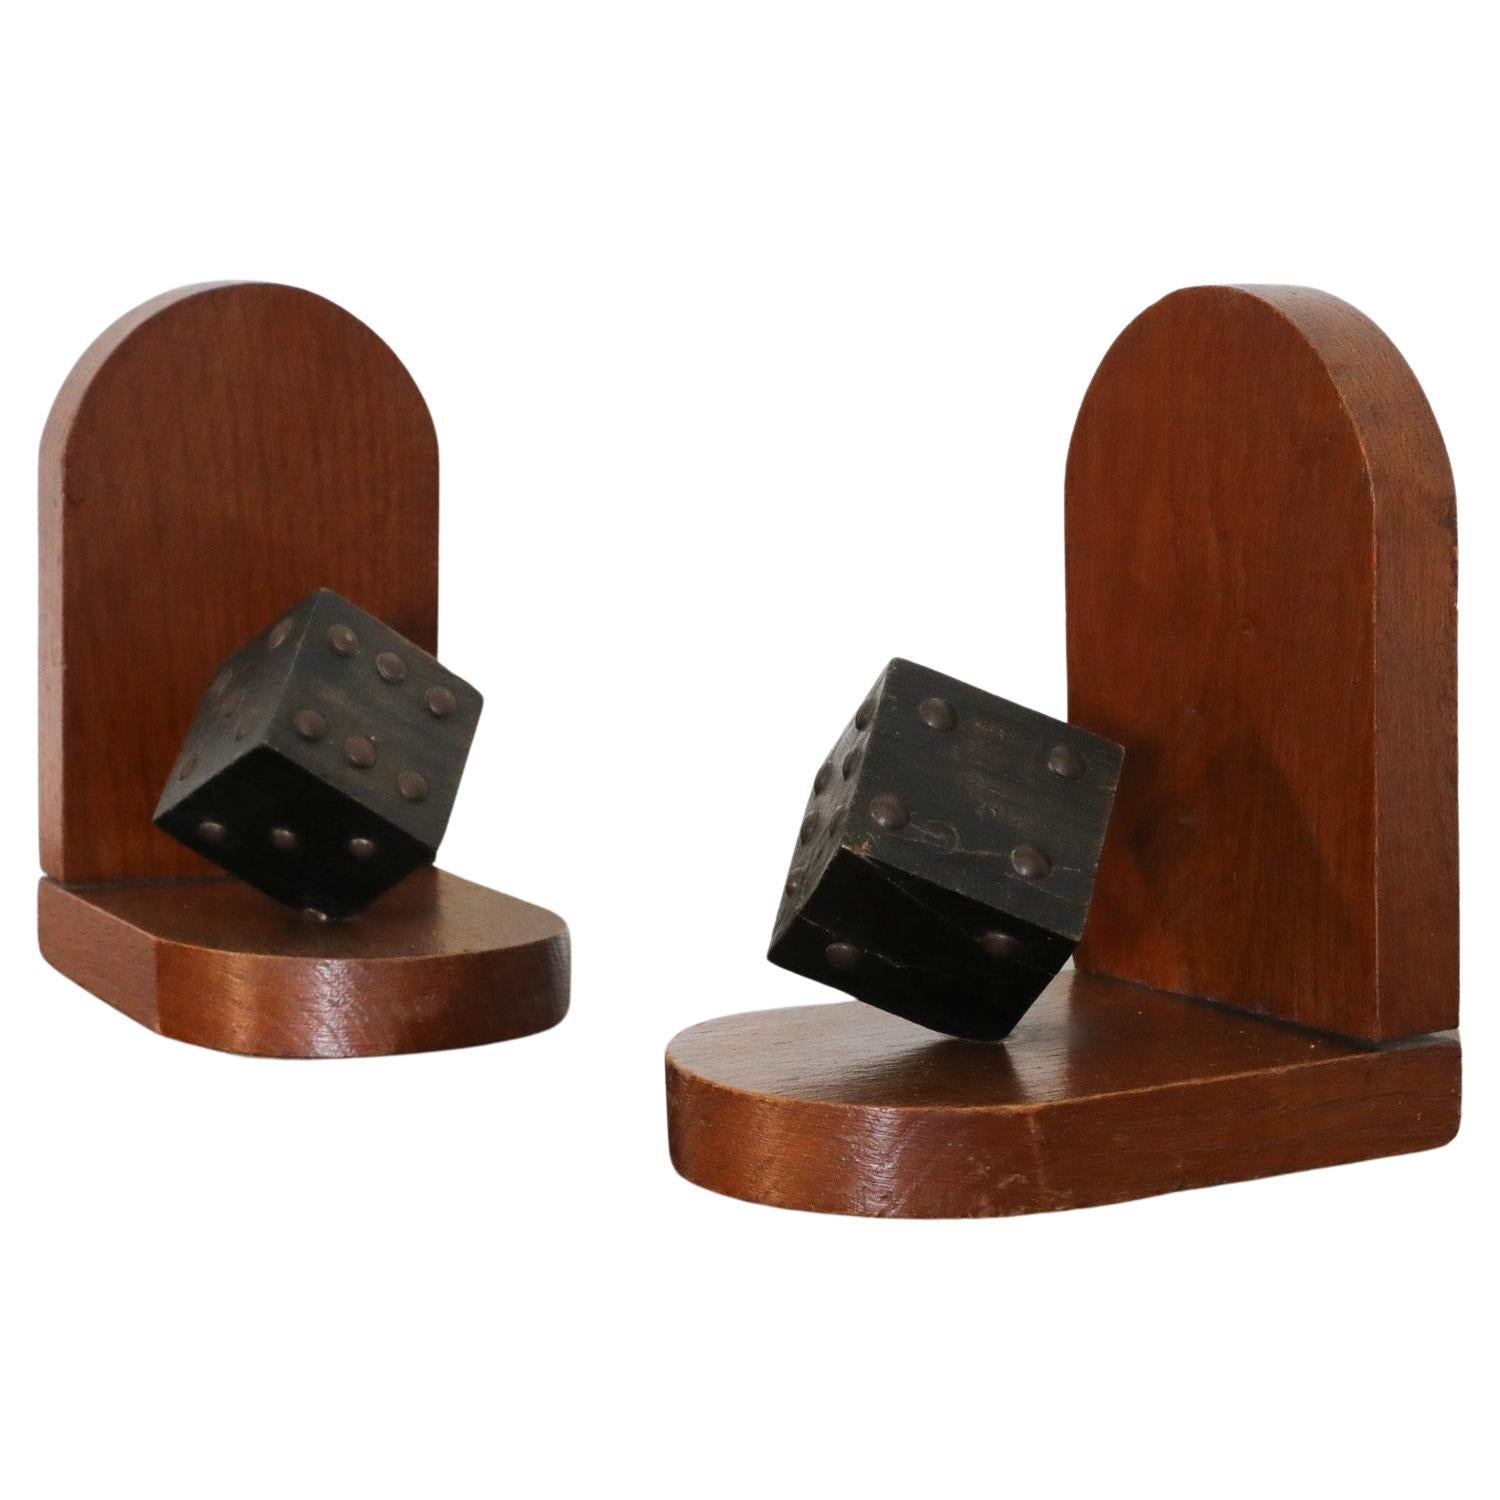 Pair of Wooden Arts & Crafts Dice Bookends For Sale